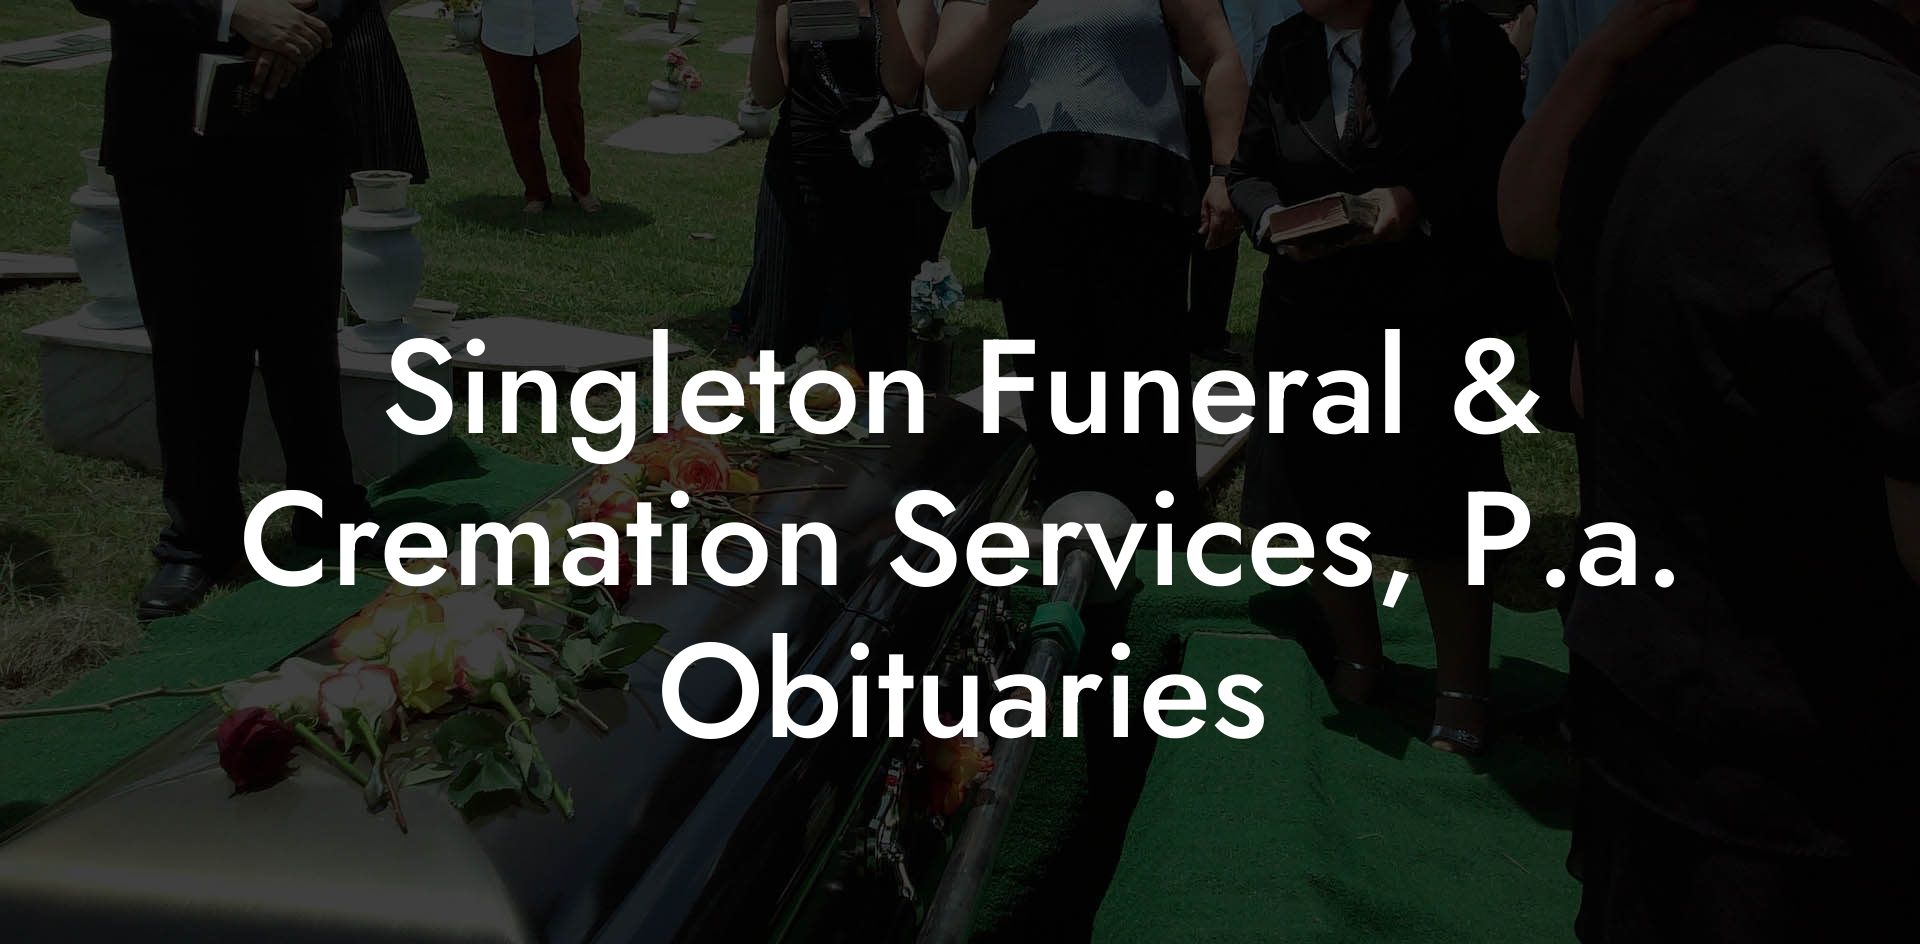 Singleton Funeral & Cremation Services, P.a. Obituaries